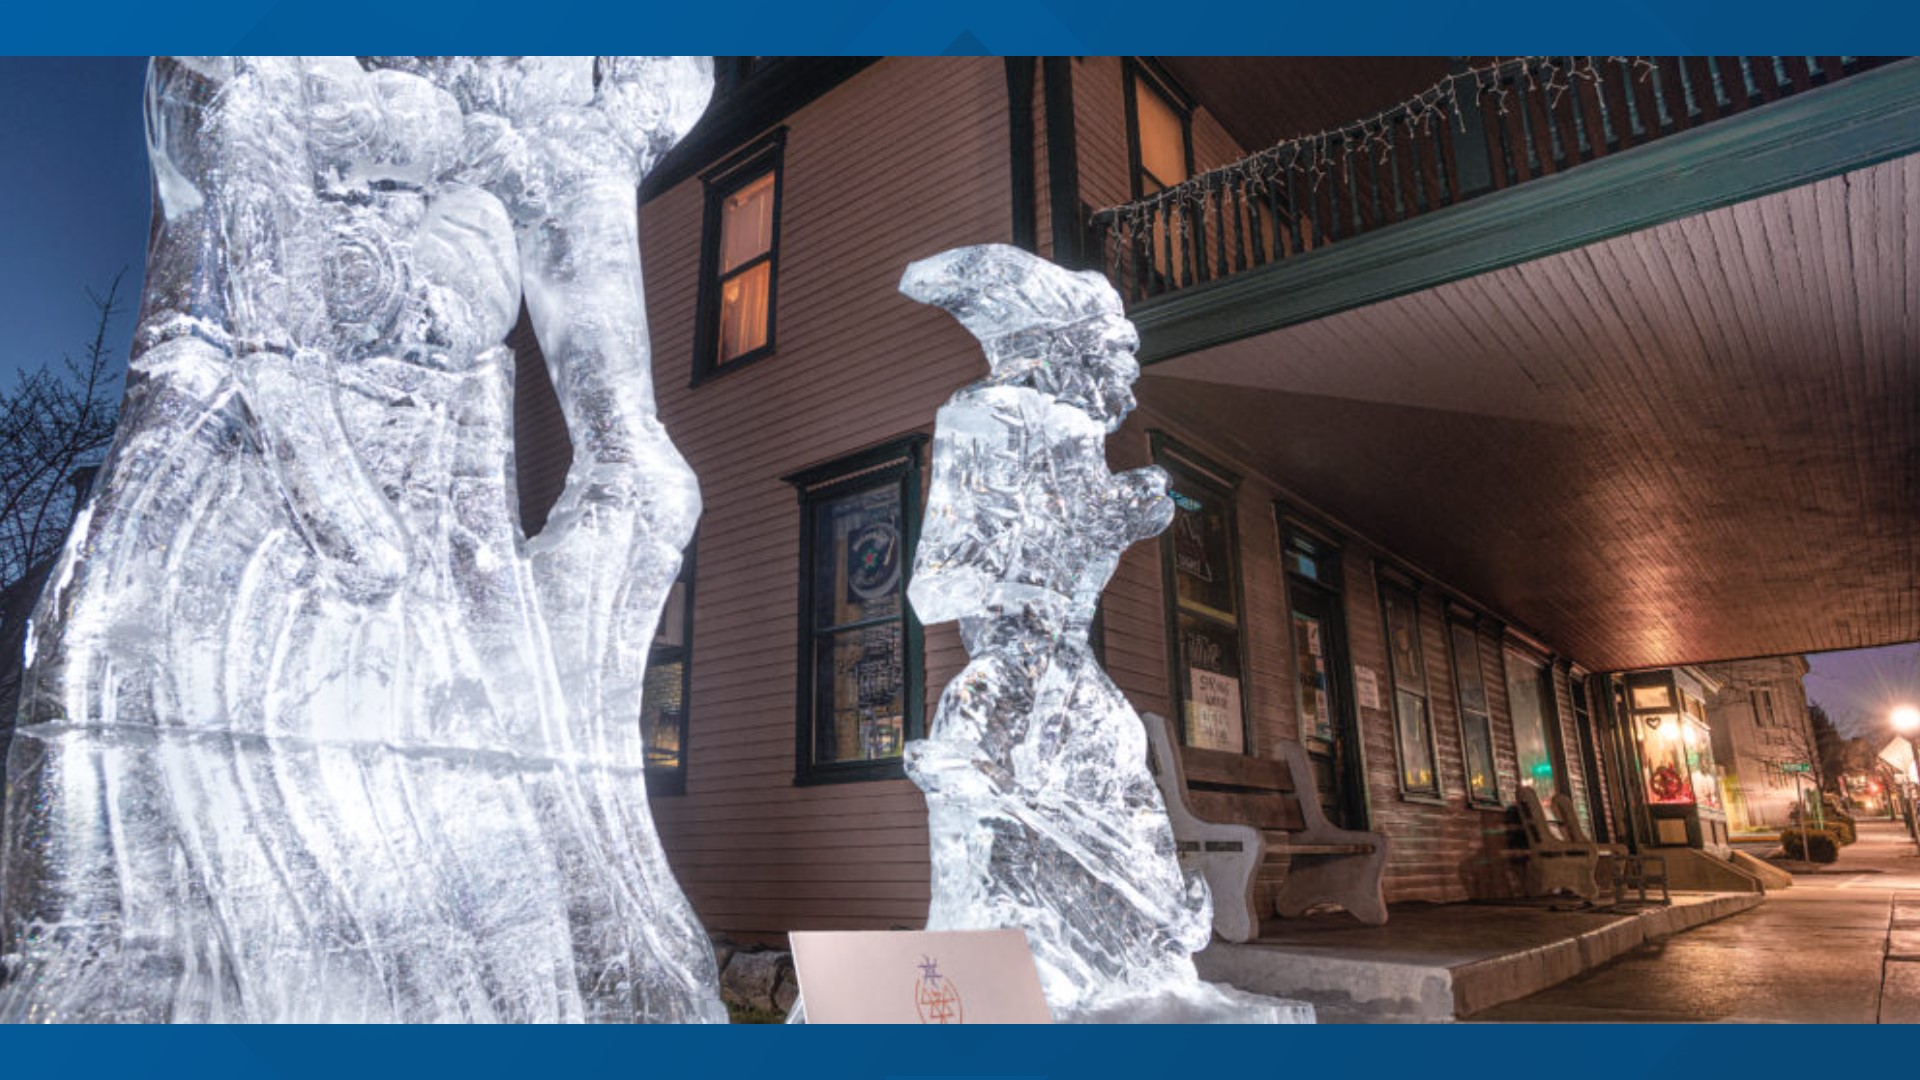 More than 30 ice sculptures were placed around downtown Lititz on Friday, but that number is shrinking as temperatures continue to rise.